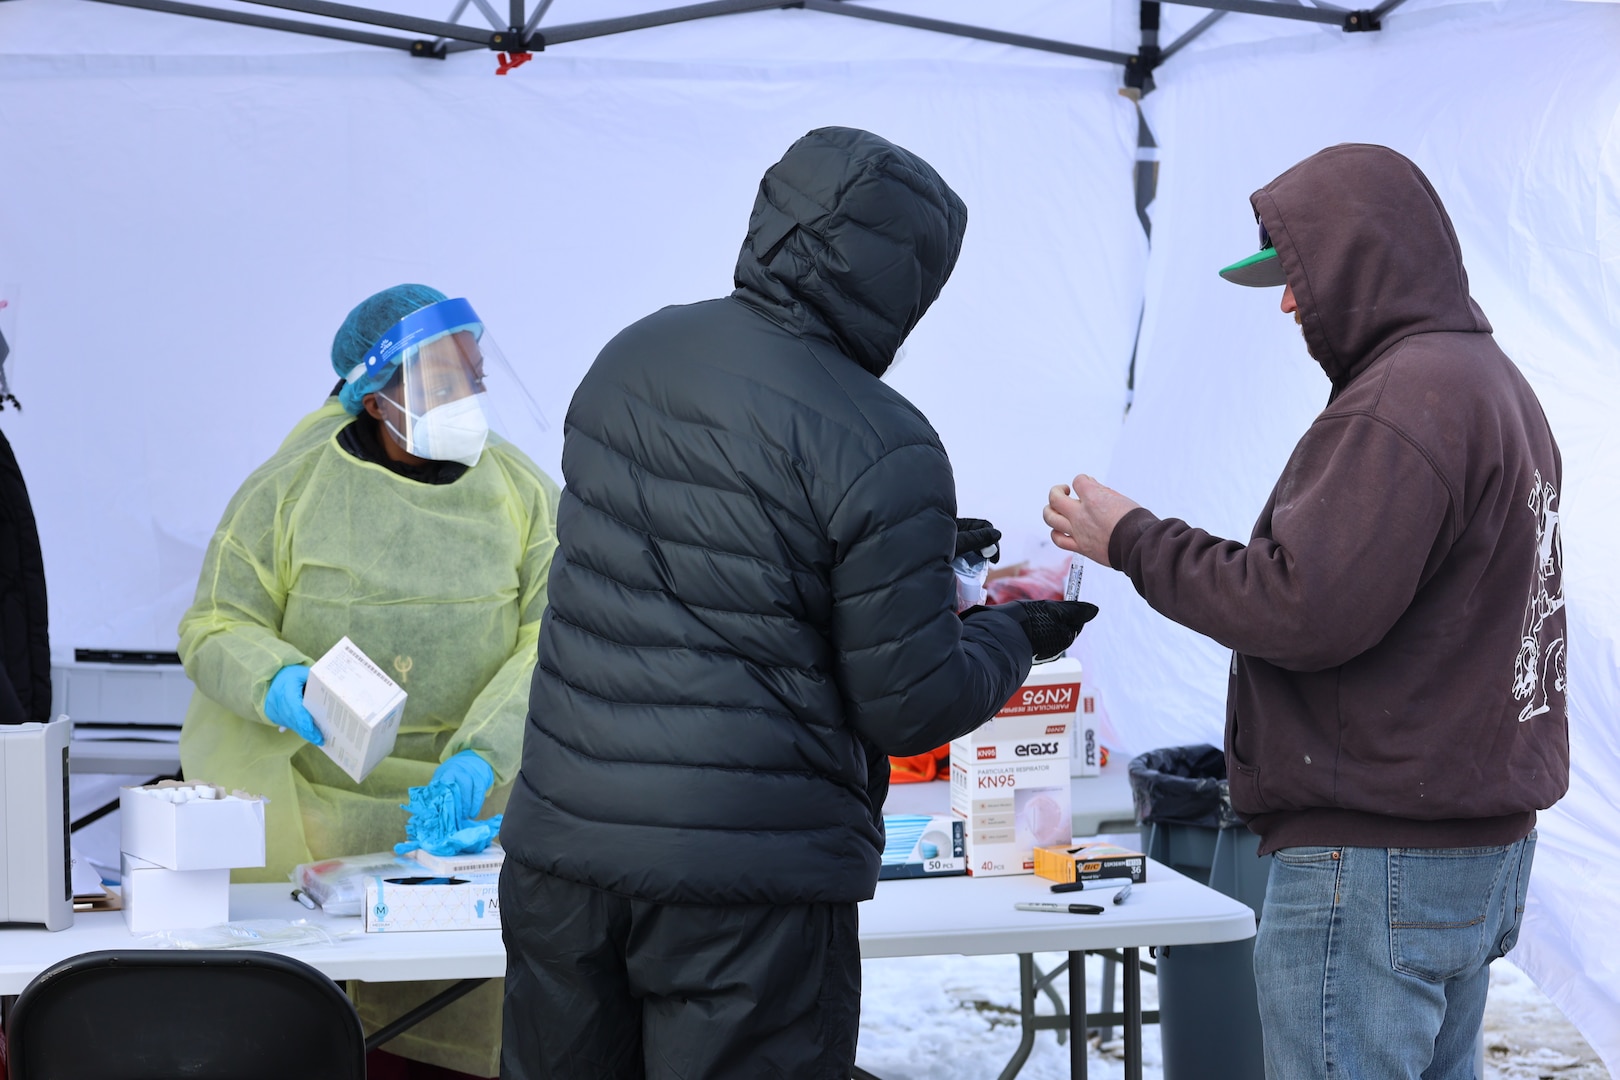 One care provider in PPE oversees two men engaged in COVID-19 test sampling under a tent.